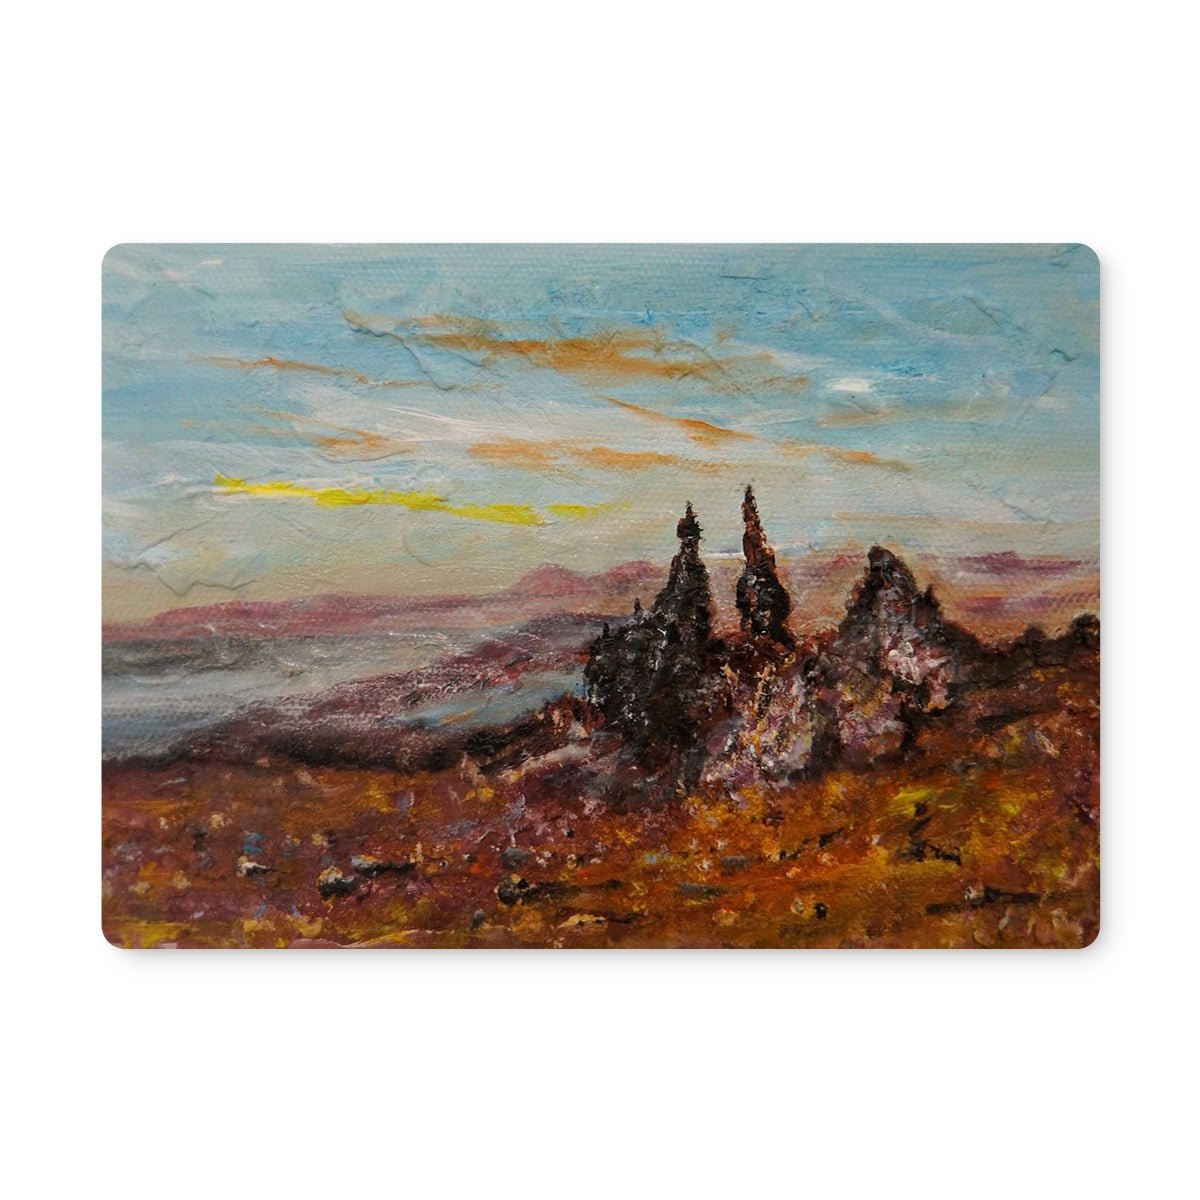 The Old Man Of Storr Skye Art Gifts Placemat-Placemats-Skye Art Gallery-2 Placemats-Paintings, Prints, Homeware, Art Gifts From Scotland By Scottish Artist Kevin Hunter